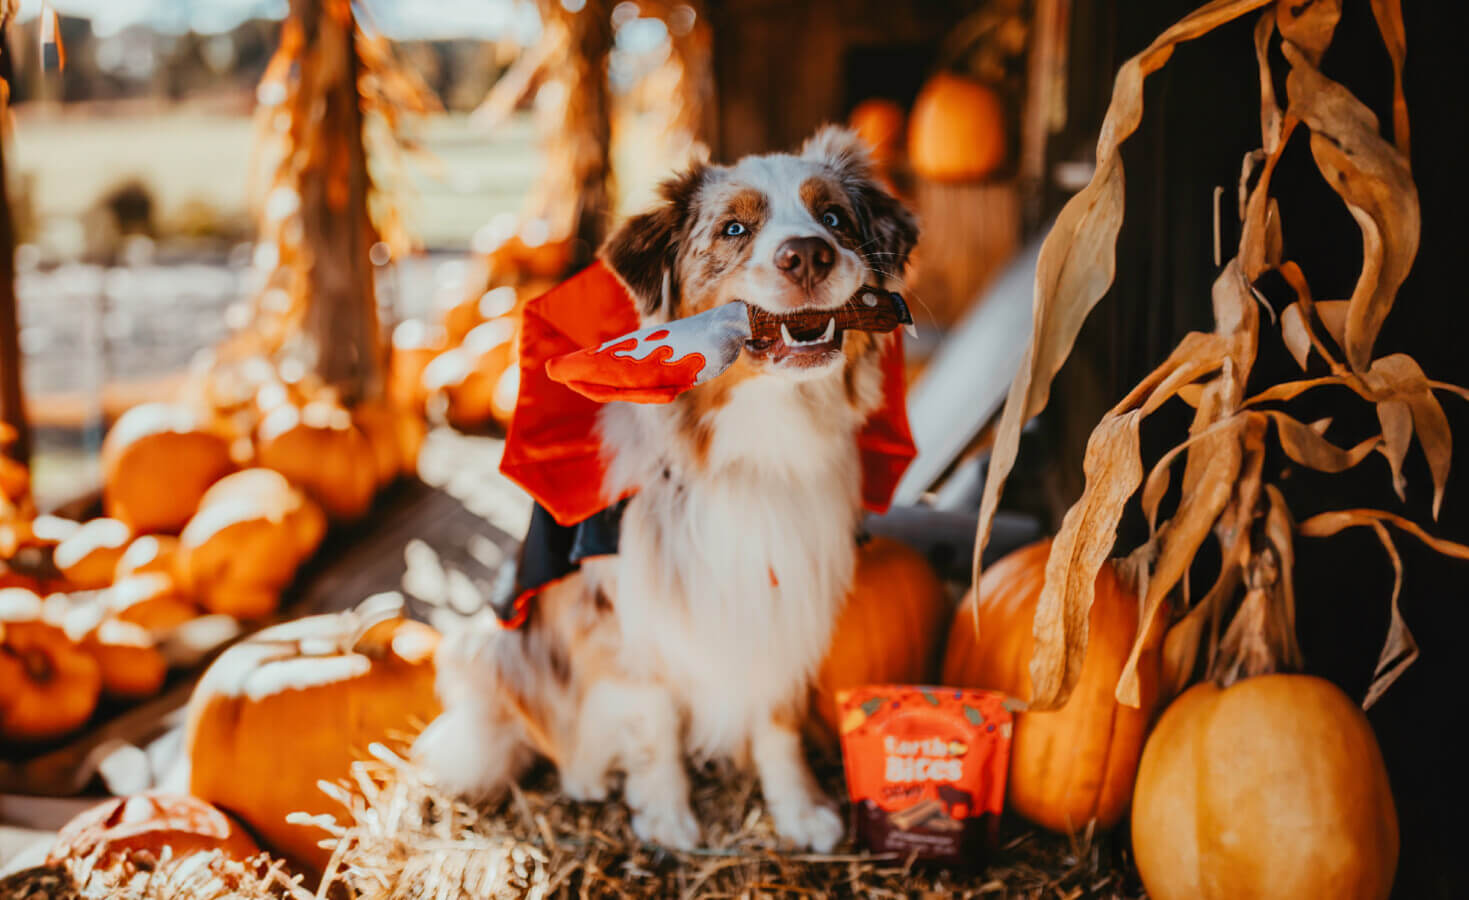 Dog in vampire costume holds toy knife next to a bag of EarthBites Chewy